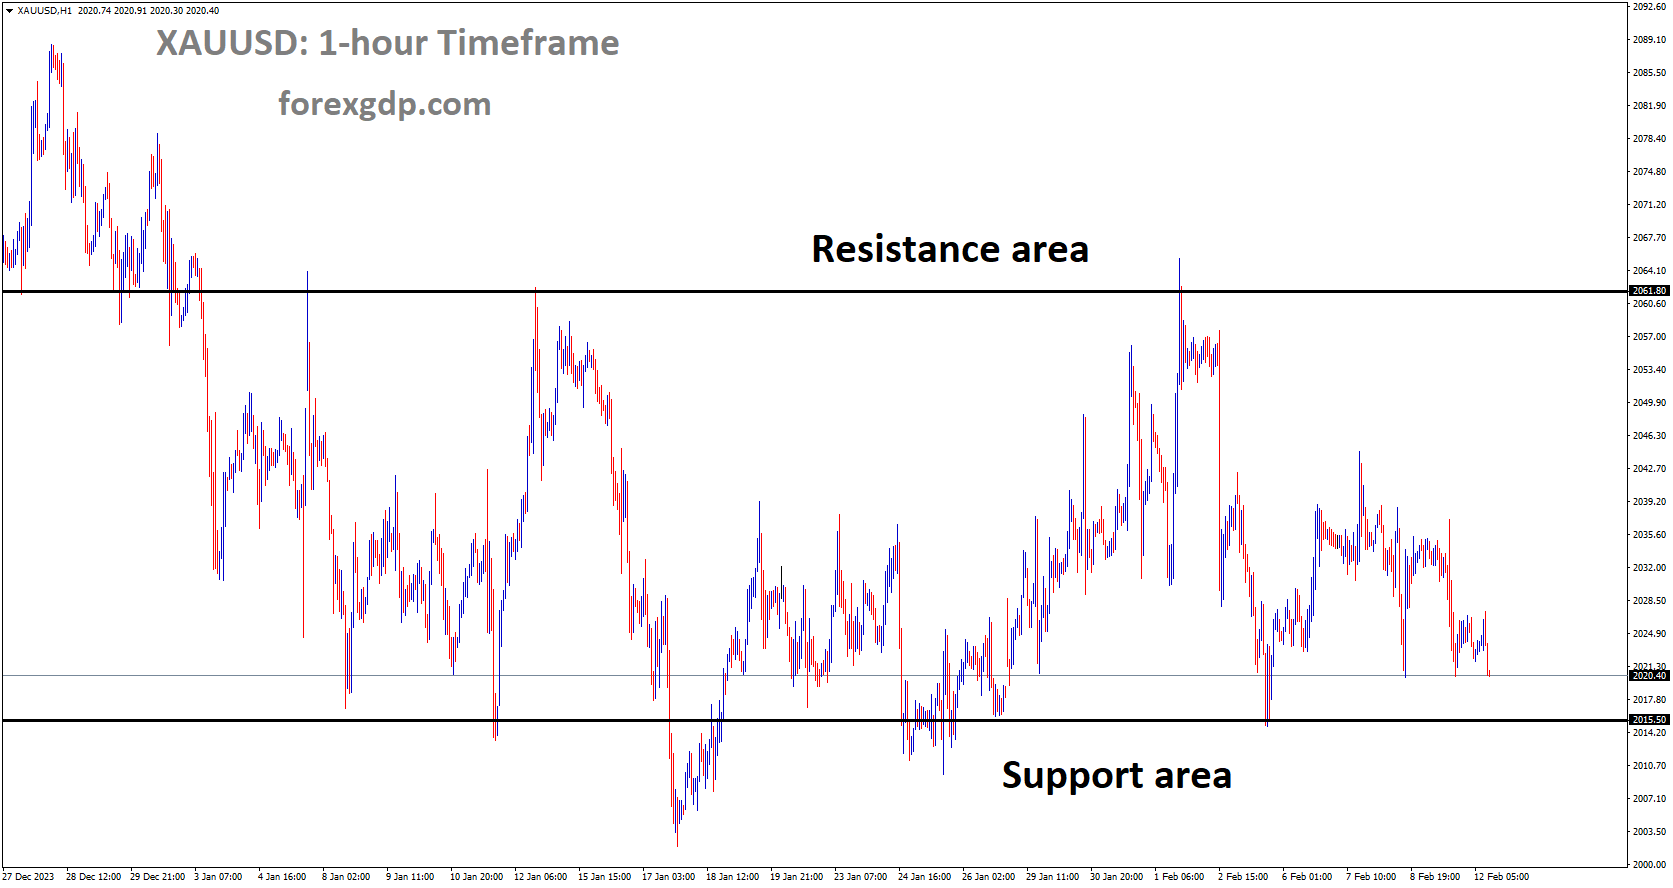 XAUUSD is moving in box pattern and market has fallen from the resistance area of the pattern